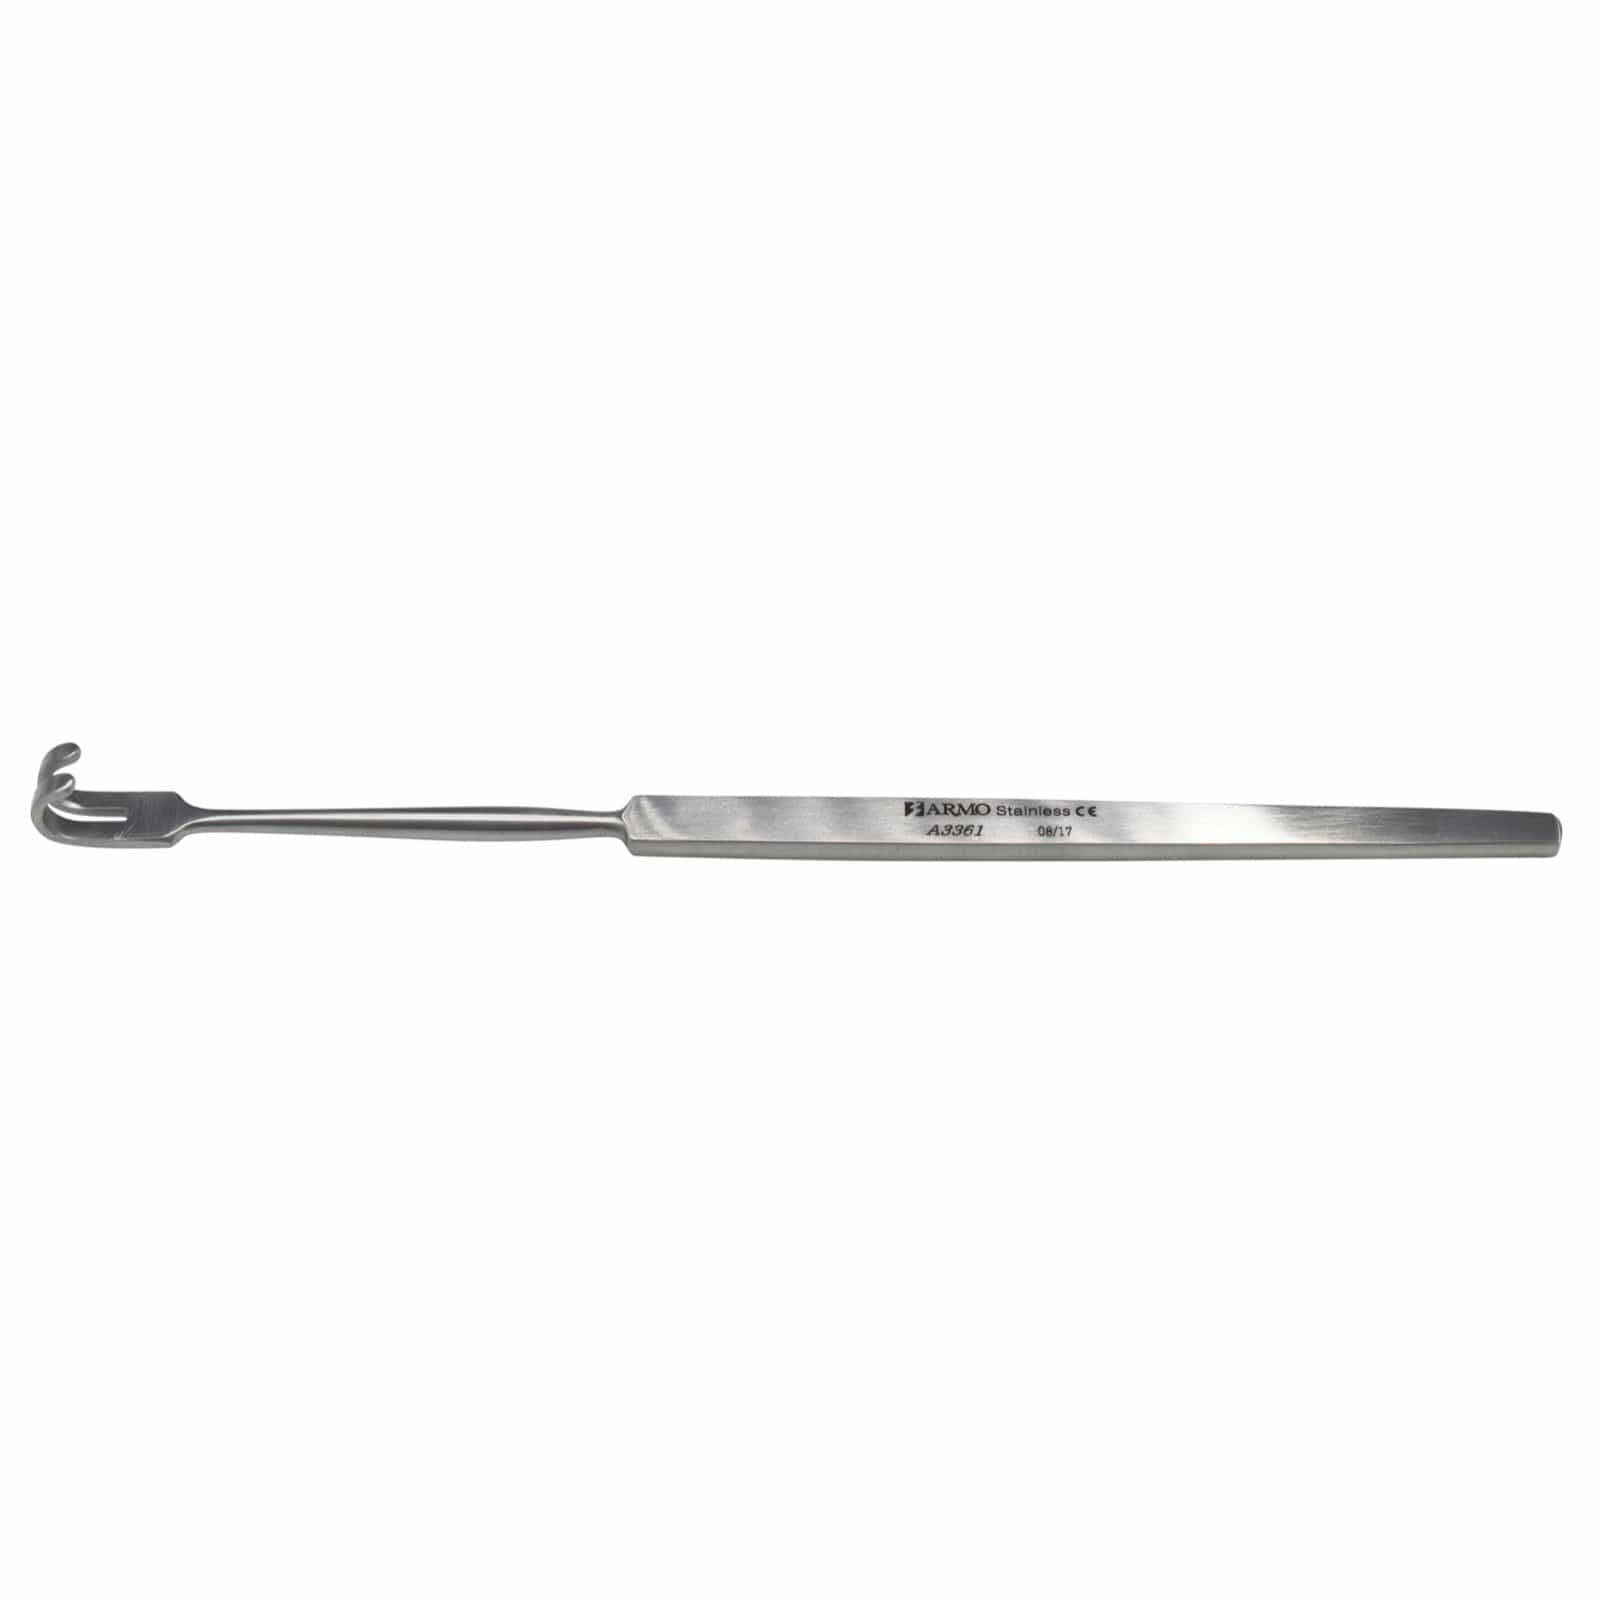 Armo Surgical Instruments 16cm / Straight 2 Prong / Blunt Armo Retractor Delicate